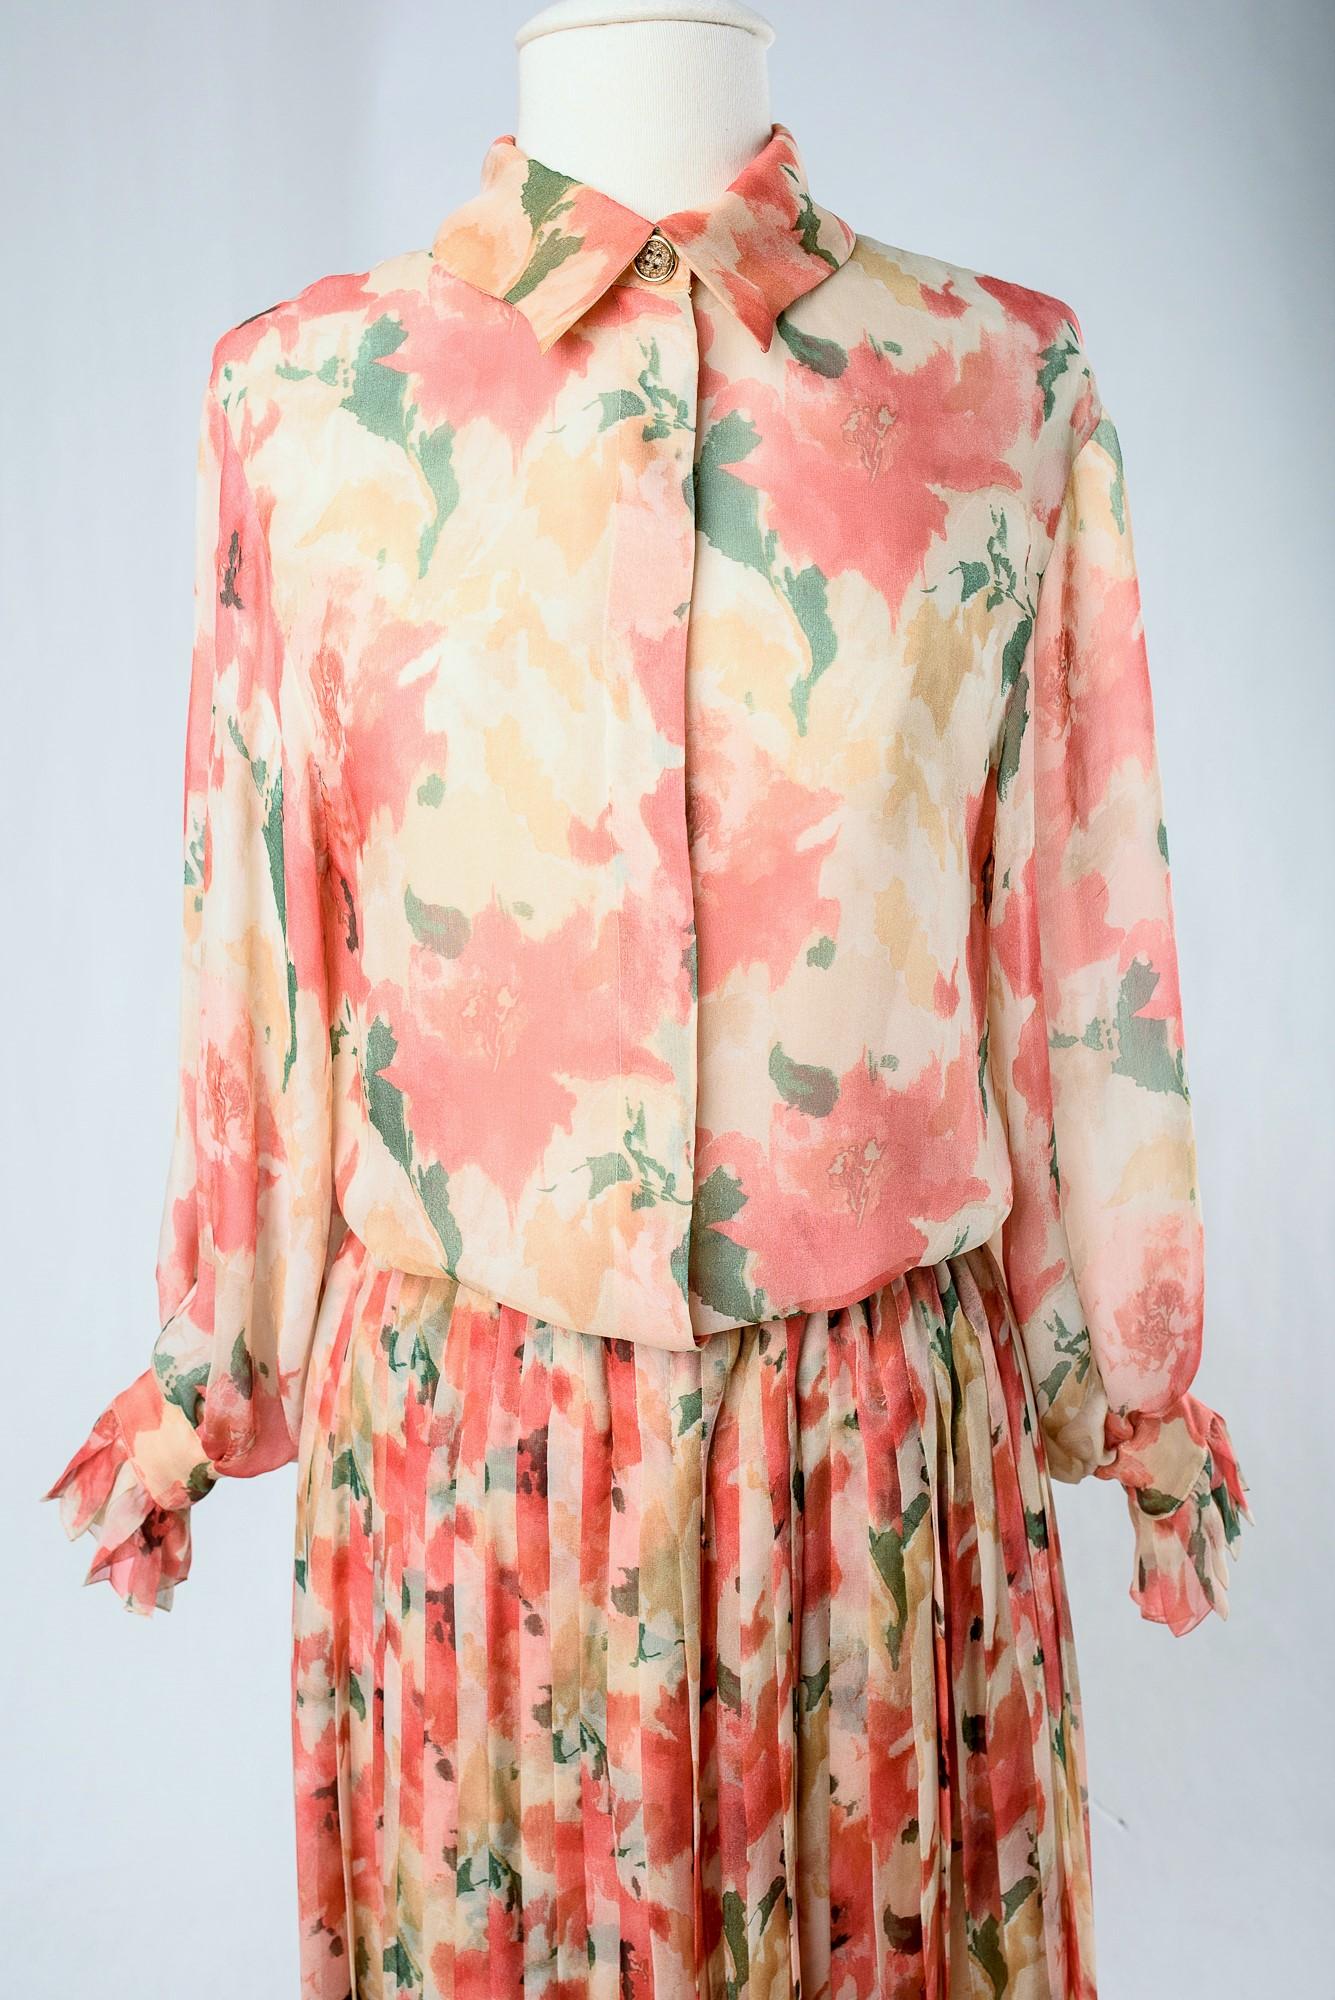 Circa 1980

France

Romantic blouse and skirt set by Christian Dior Boutique under the direction of Marc Bohan and dating from the 1980s. Translucent silk crepe printed with Impressionist floral motifs in shades of pink, salmon, green and sepia on